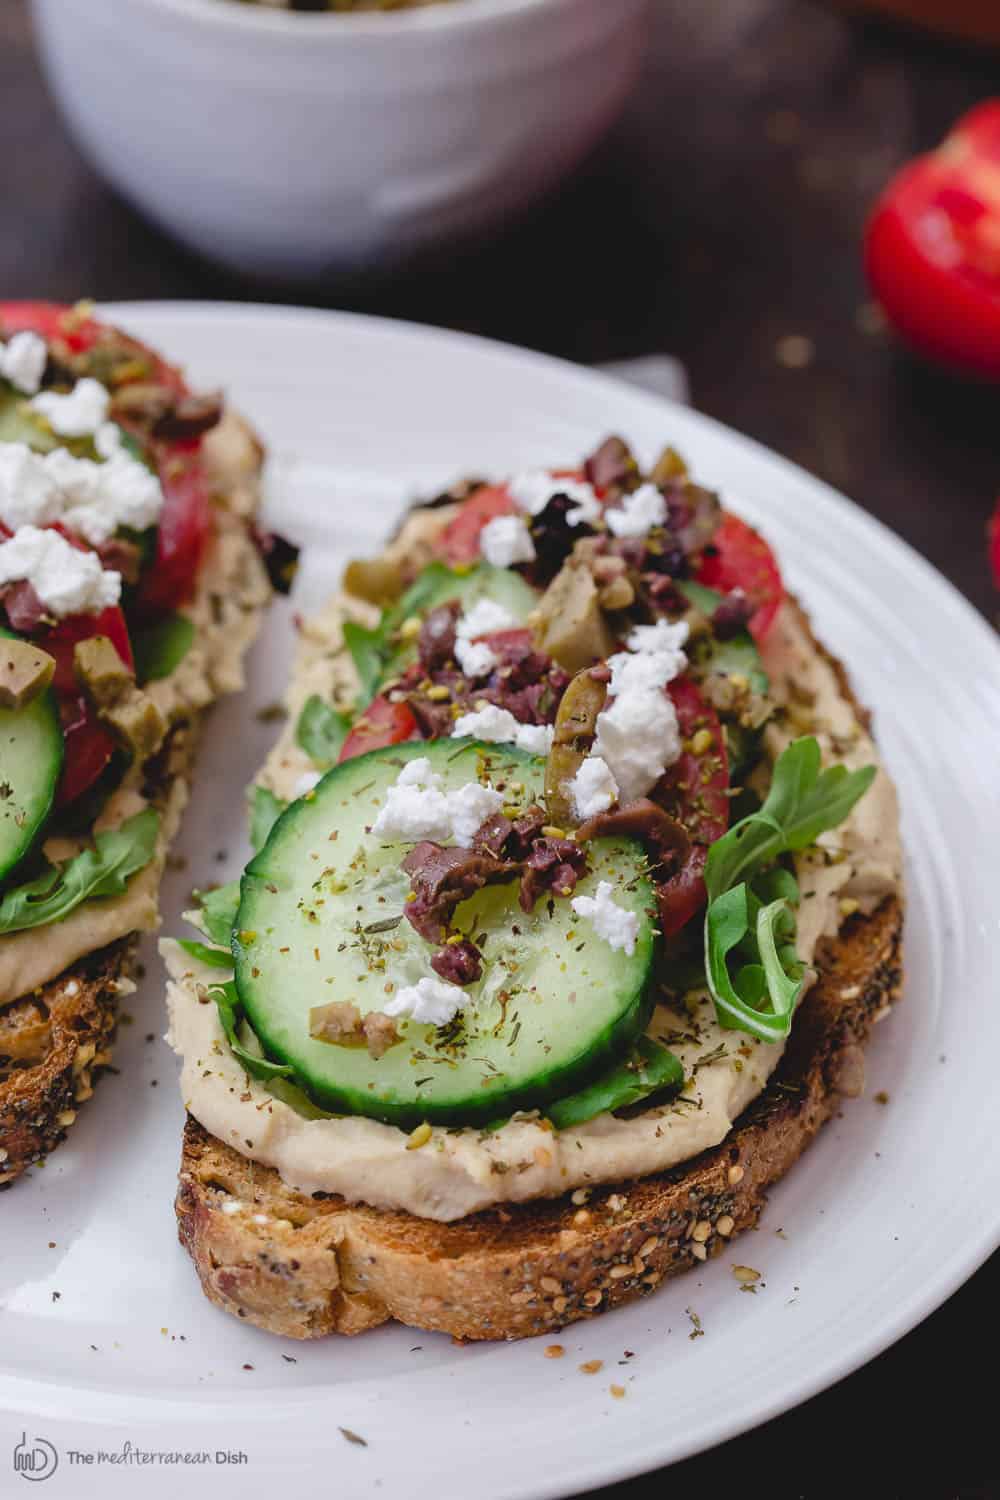 Mediterranean-Style Breakfast Toast with hummus, arugula, cucumbers, tomatoes, olives, a sprinkle of za'atar and feta cheese